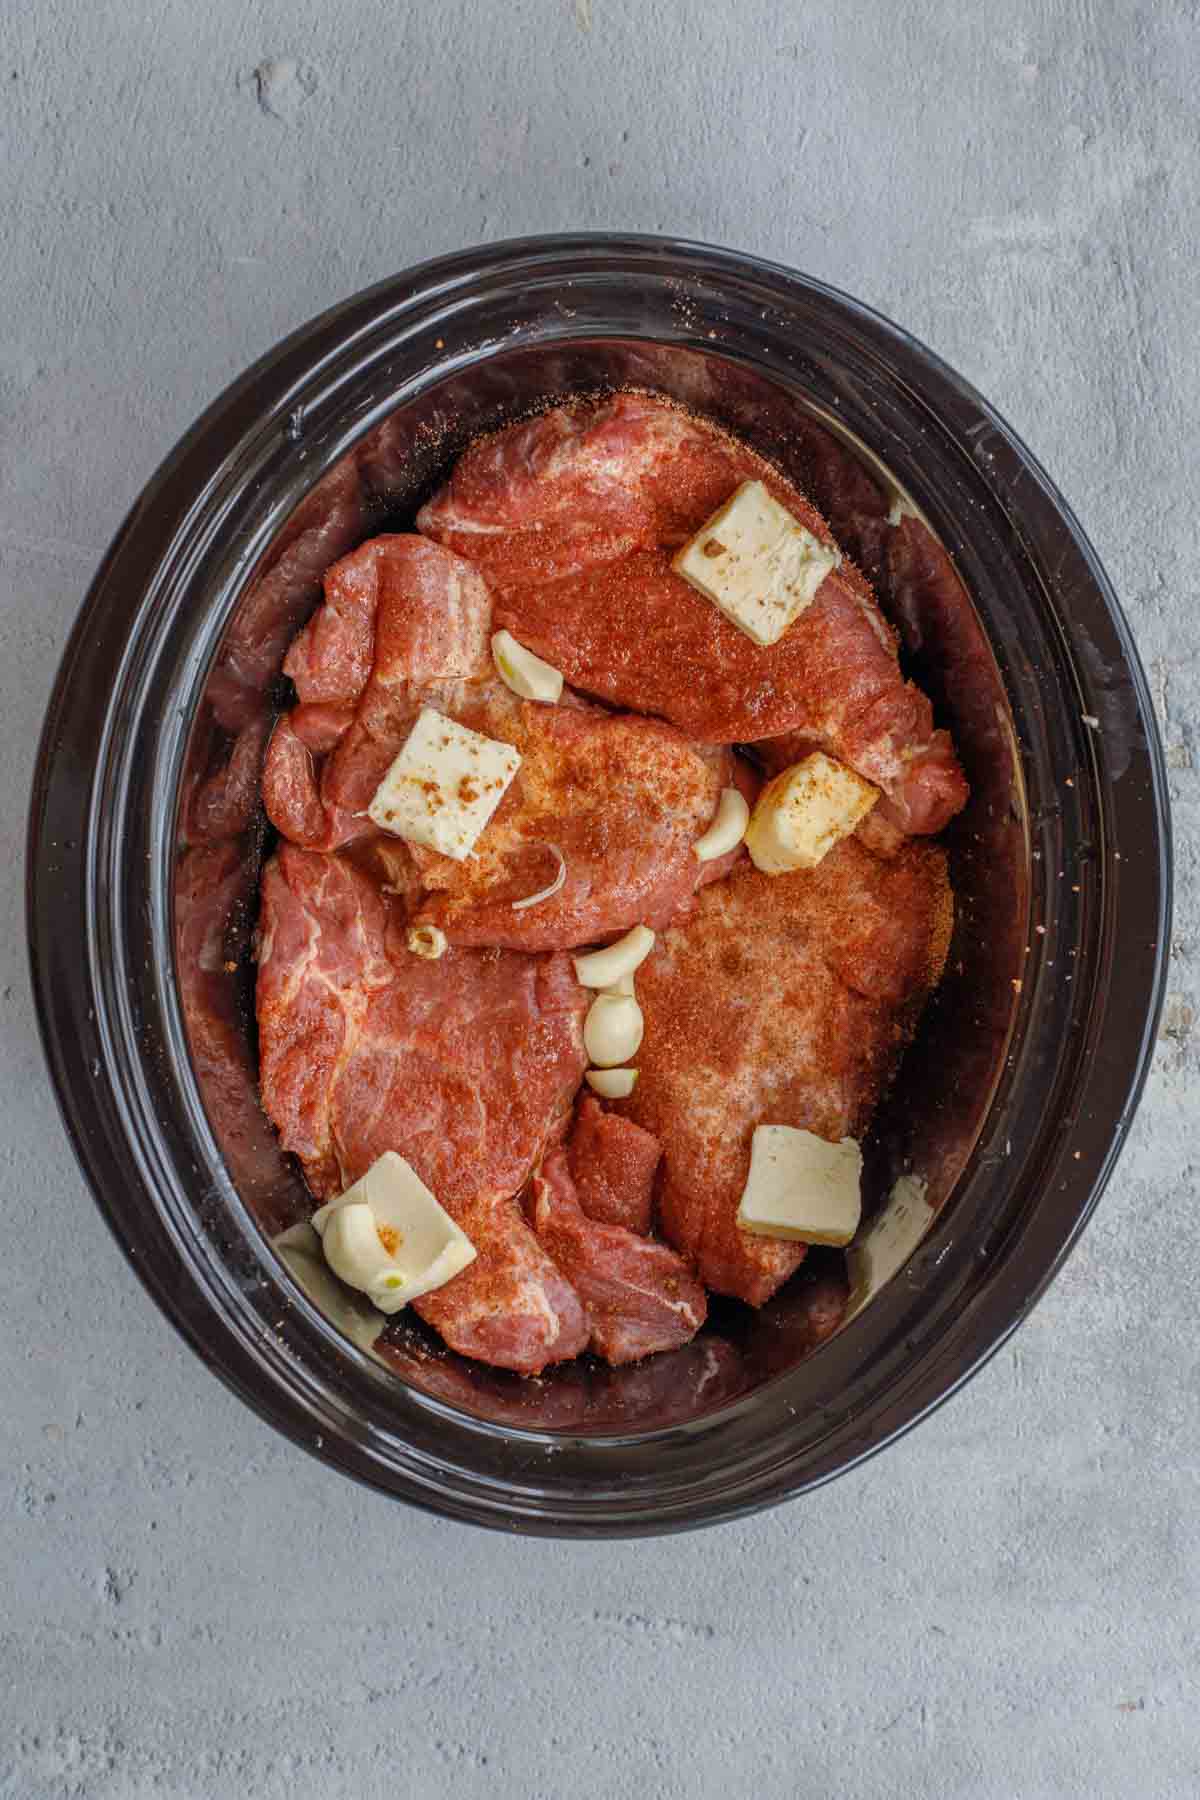 The crockpot with the meat and butter. 